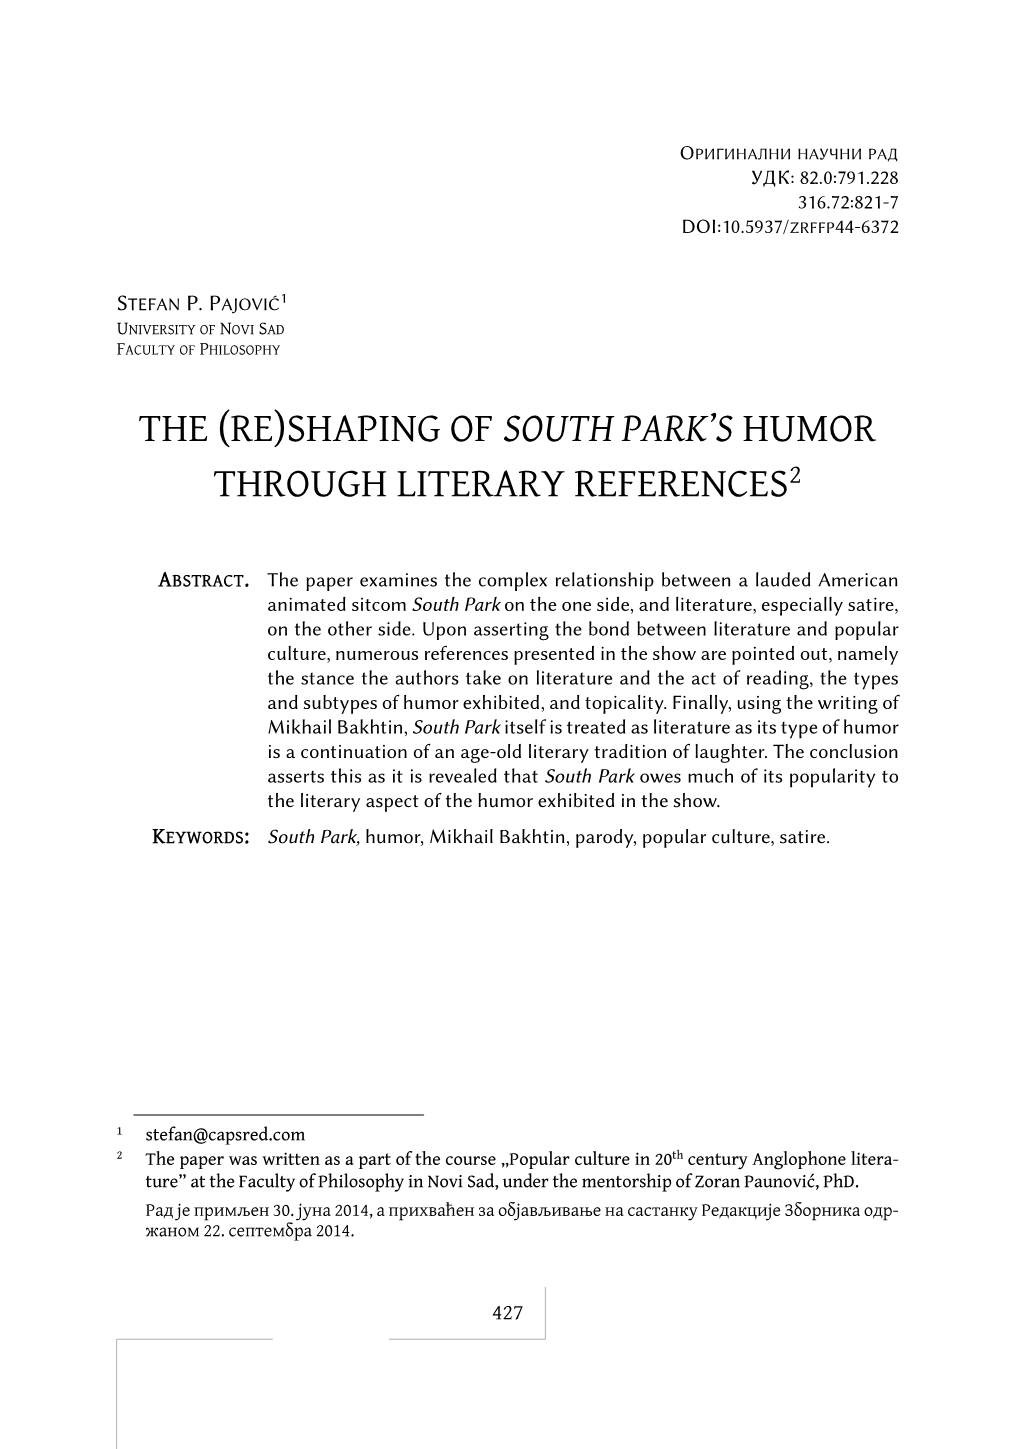 The (Re)Shaping of South Park's Humor Through